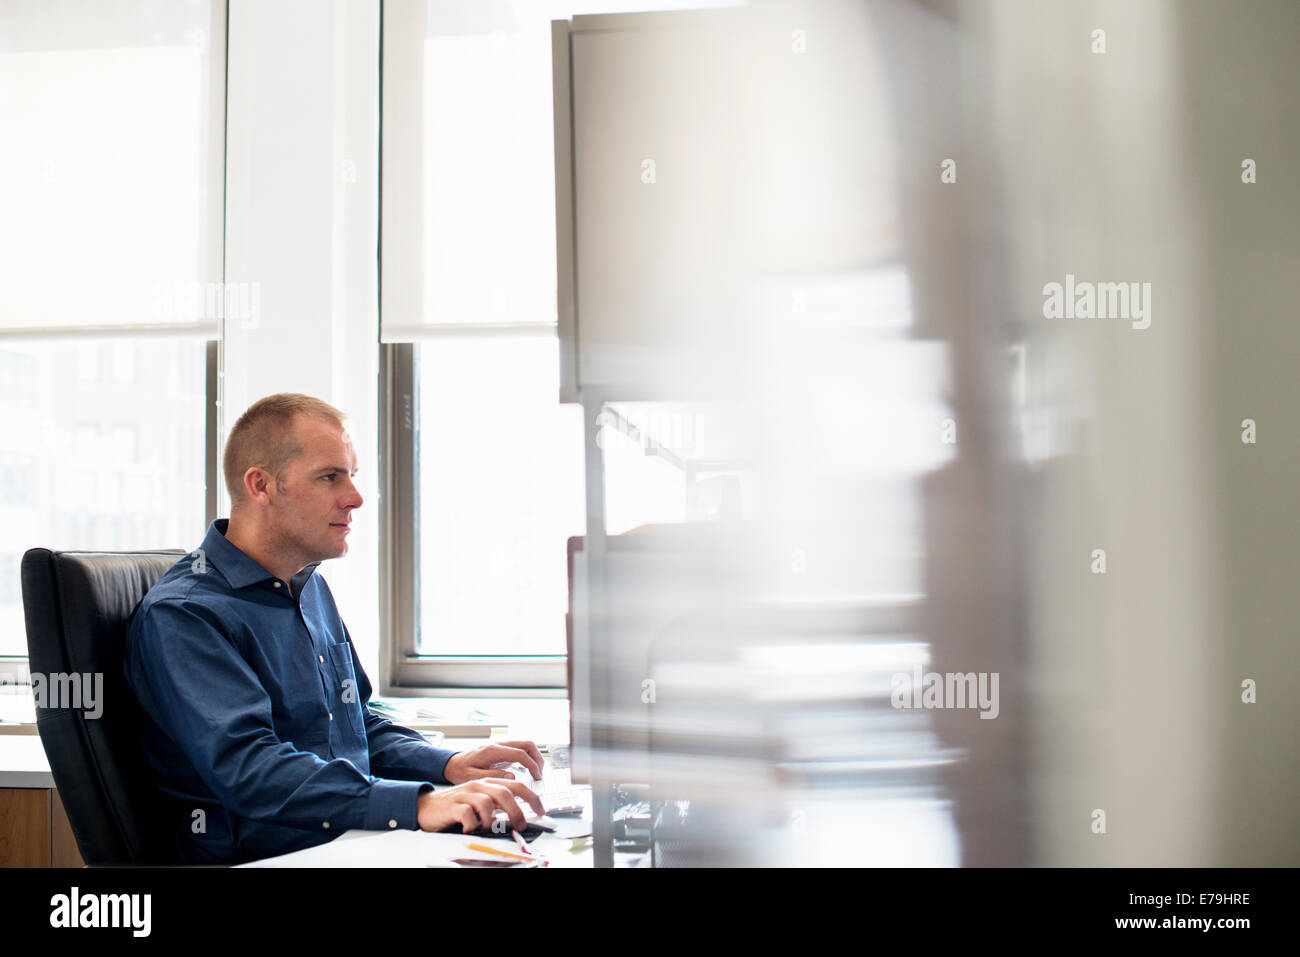 A man working in an office at a desk using a computer mouse. Focusing on a task. Stock Photo